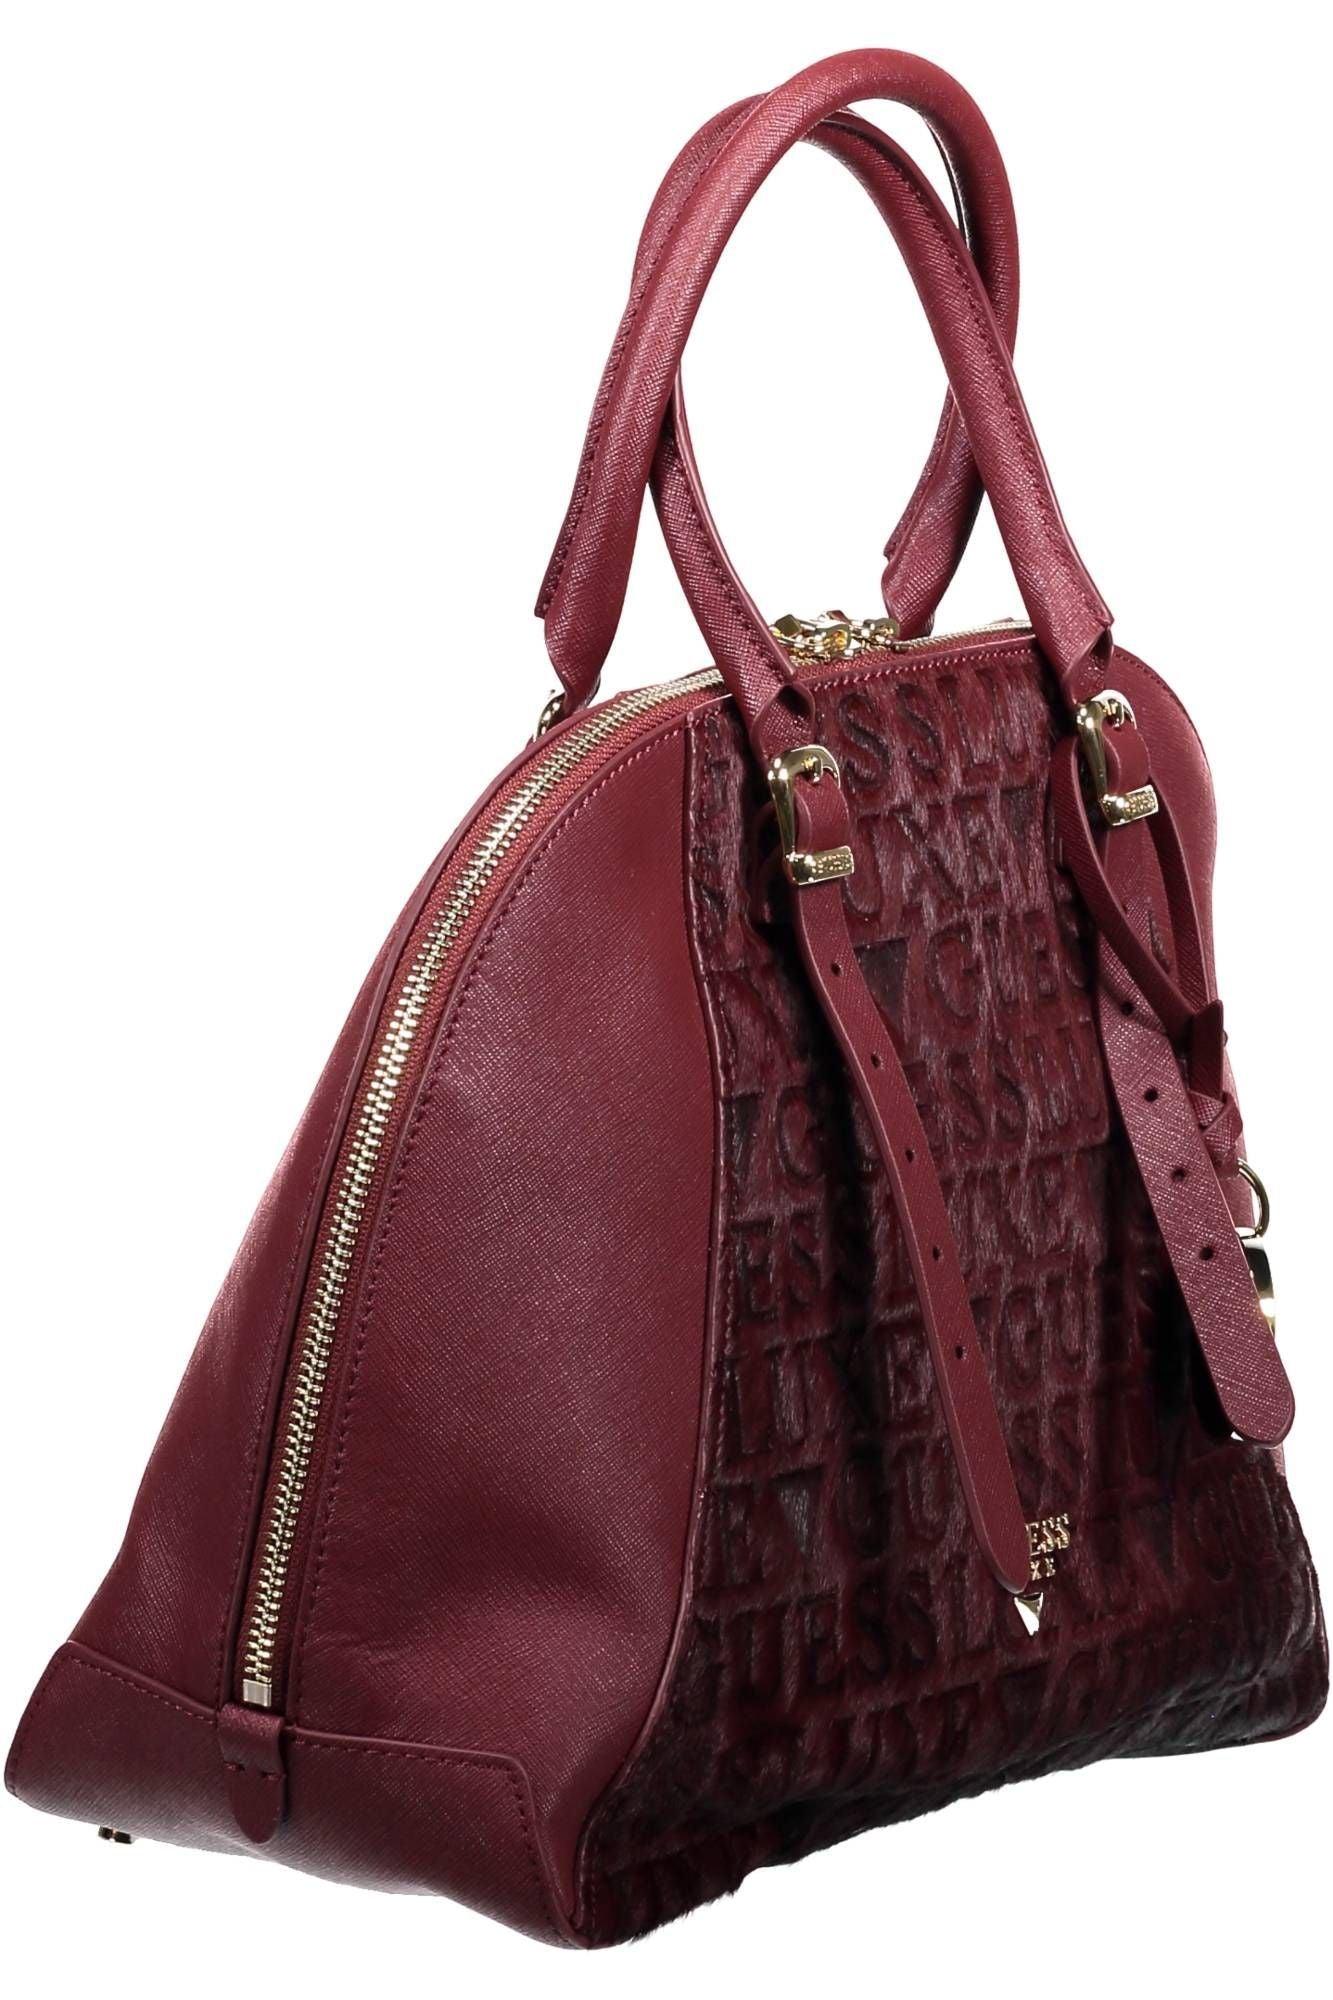 Guess Leather Handbag in Red